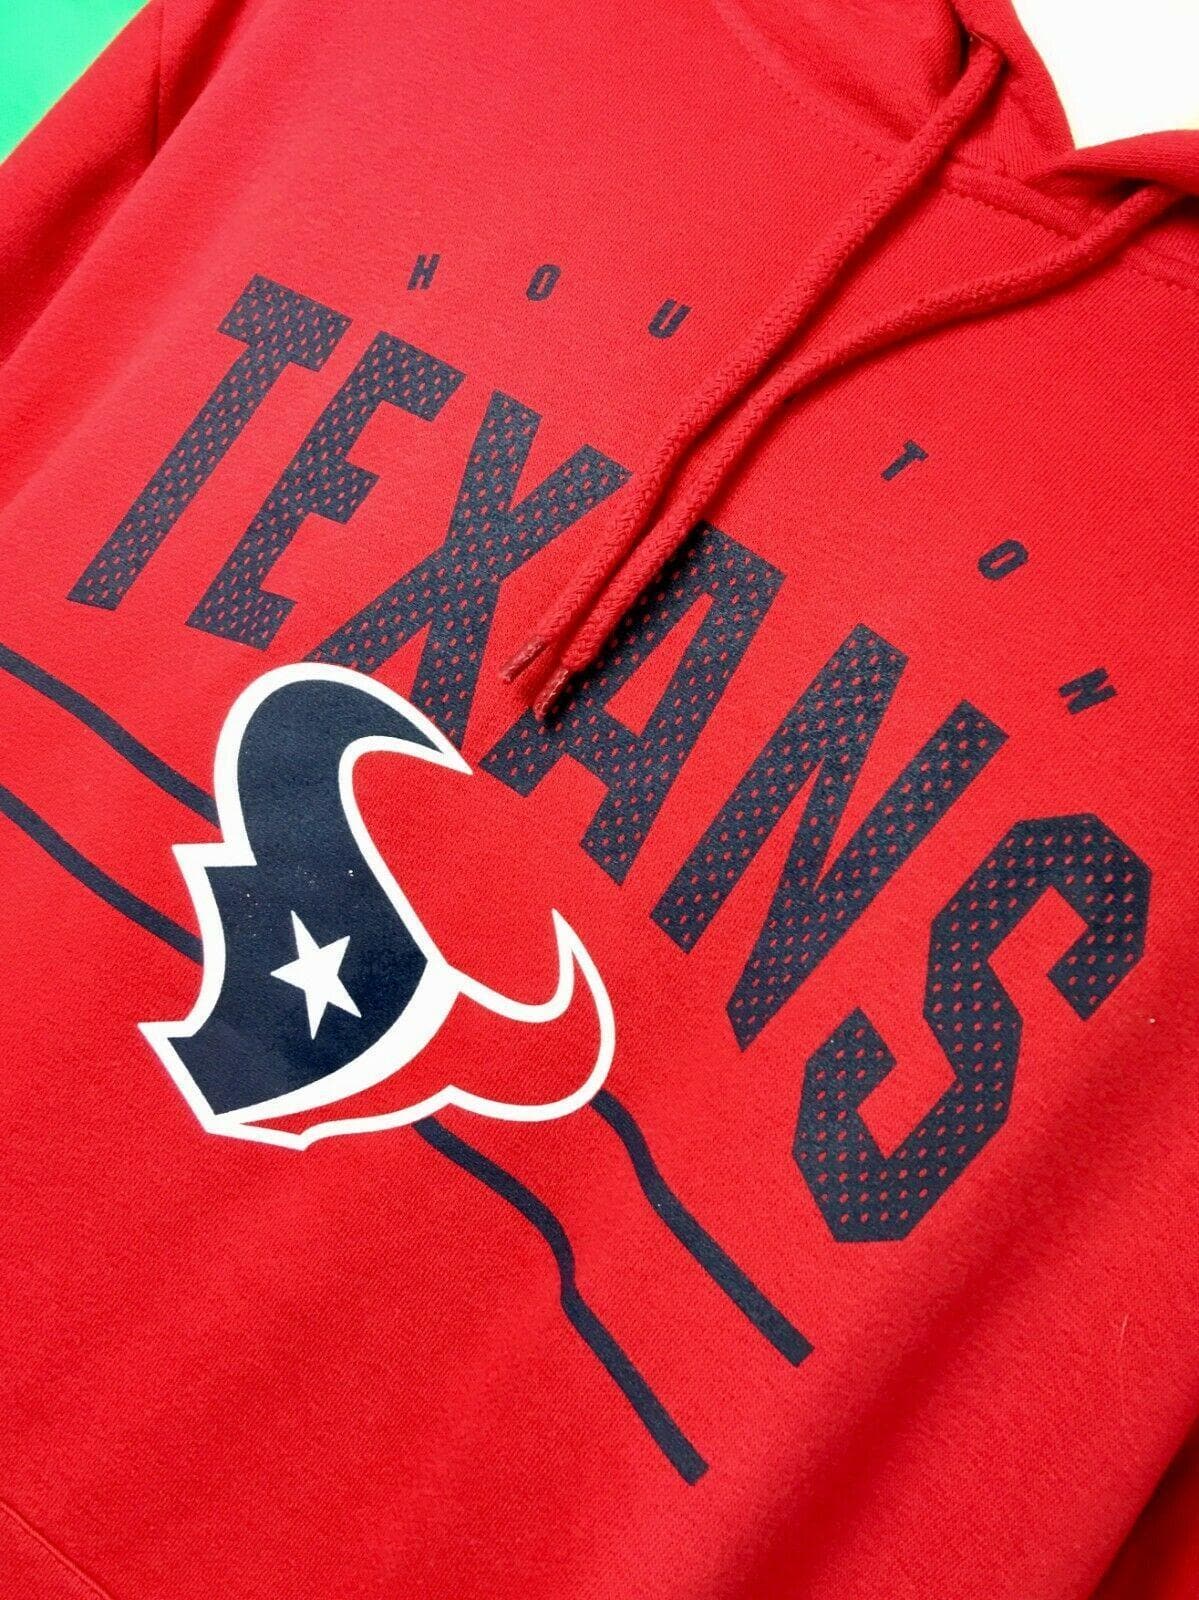 NFL Houston Texans Red Pullover Hoodie Men's 2X-Large NWT